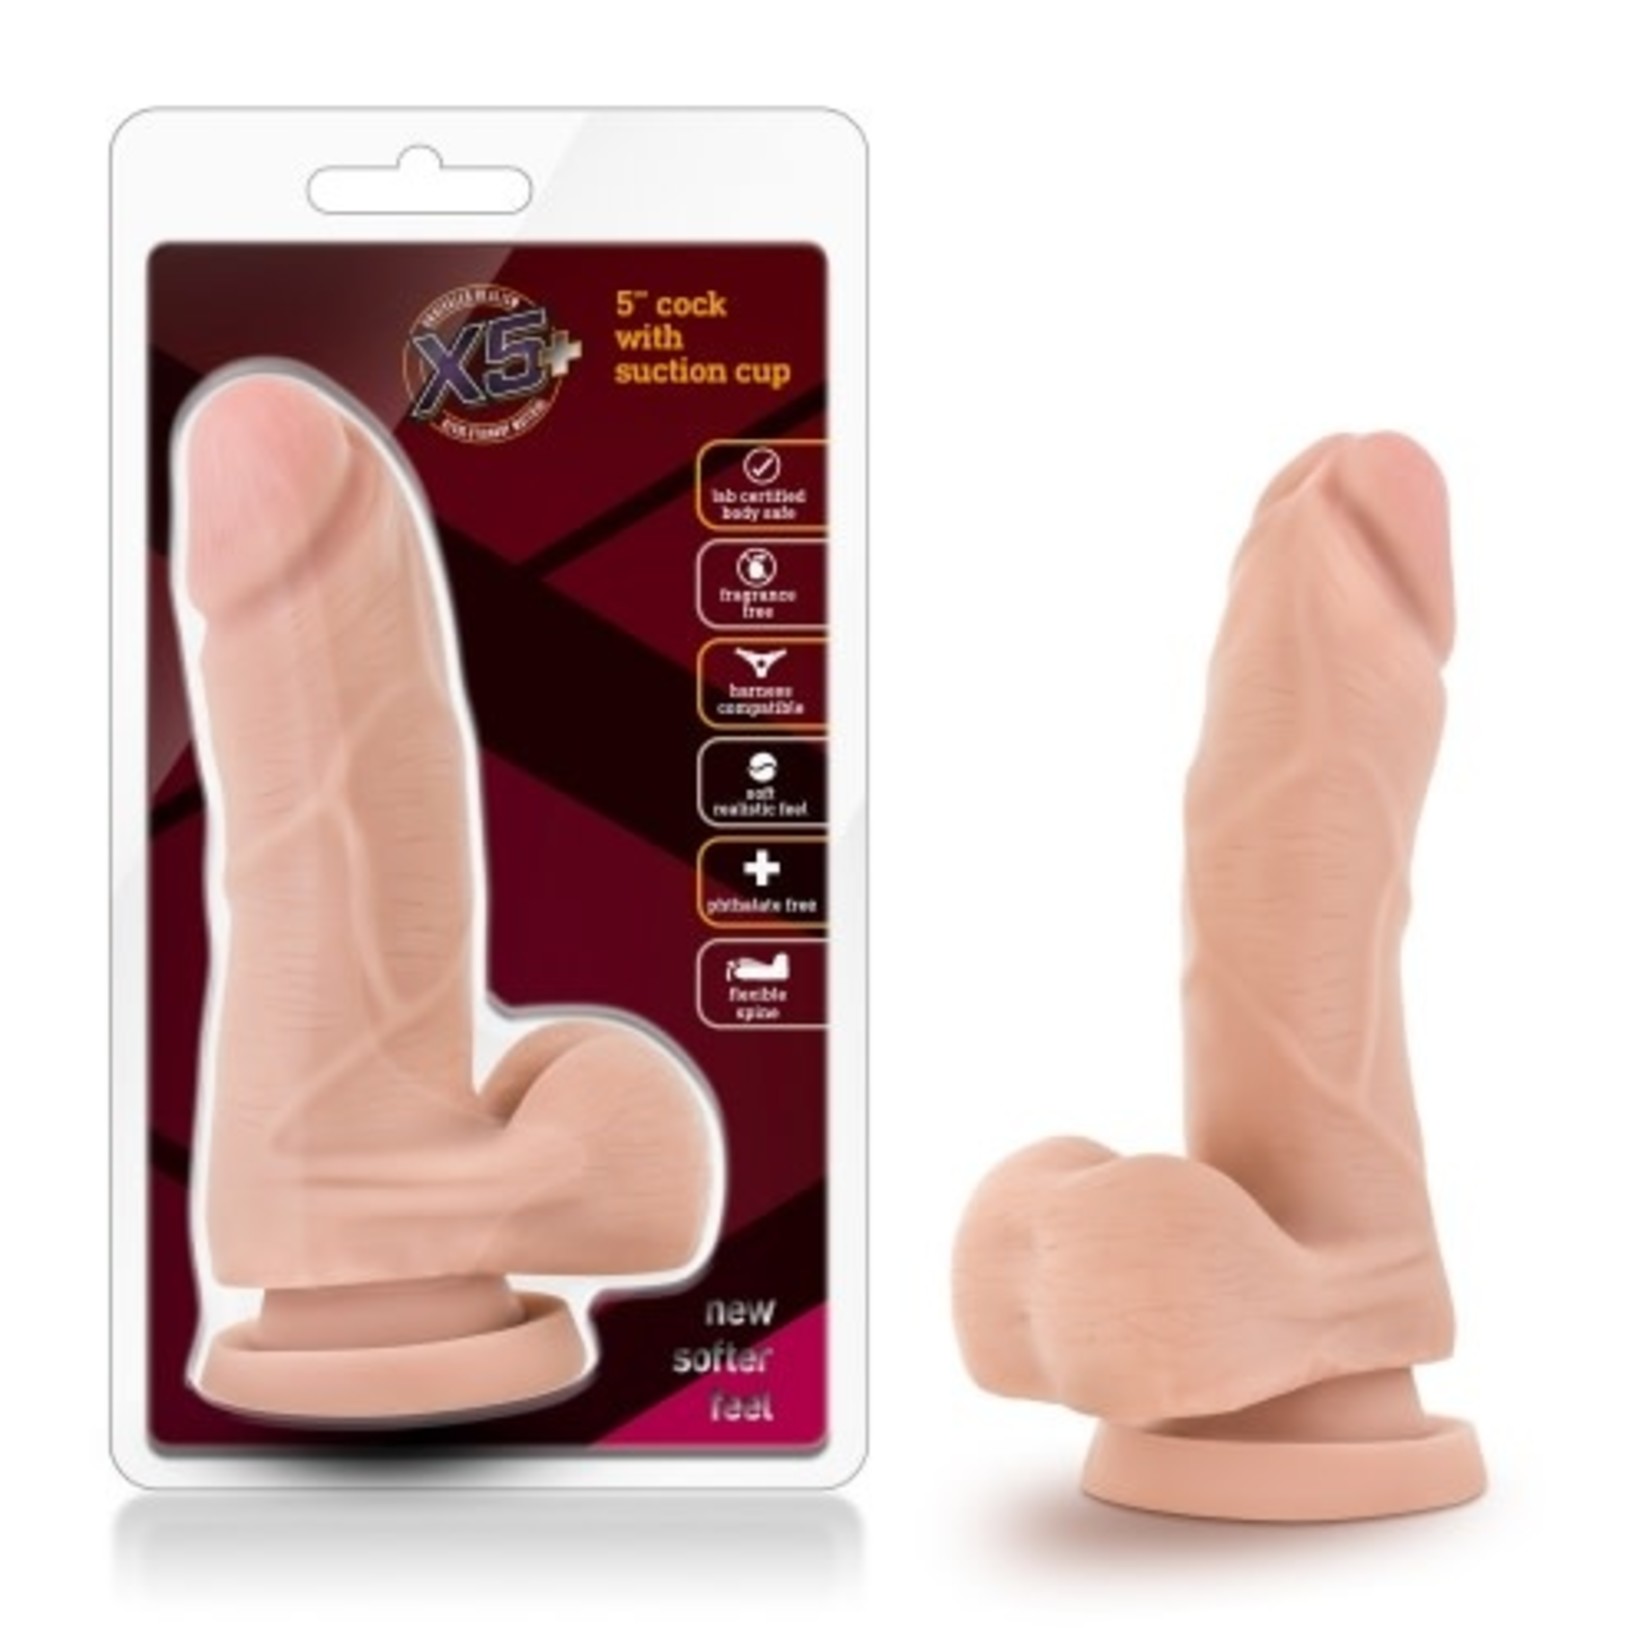 BLUSH BLUSH - X5 PLUS - 5" COCK WITH SUCTION CUP - BEIGE